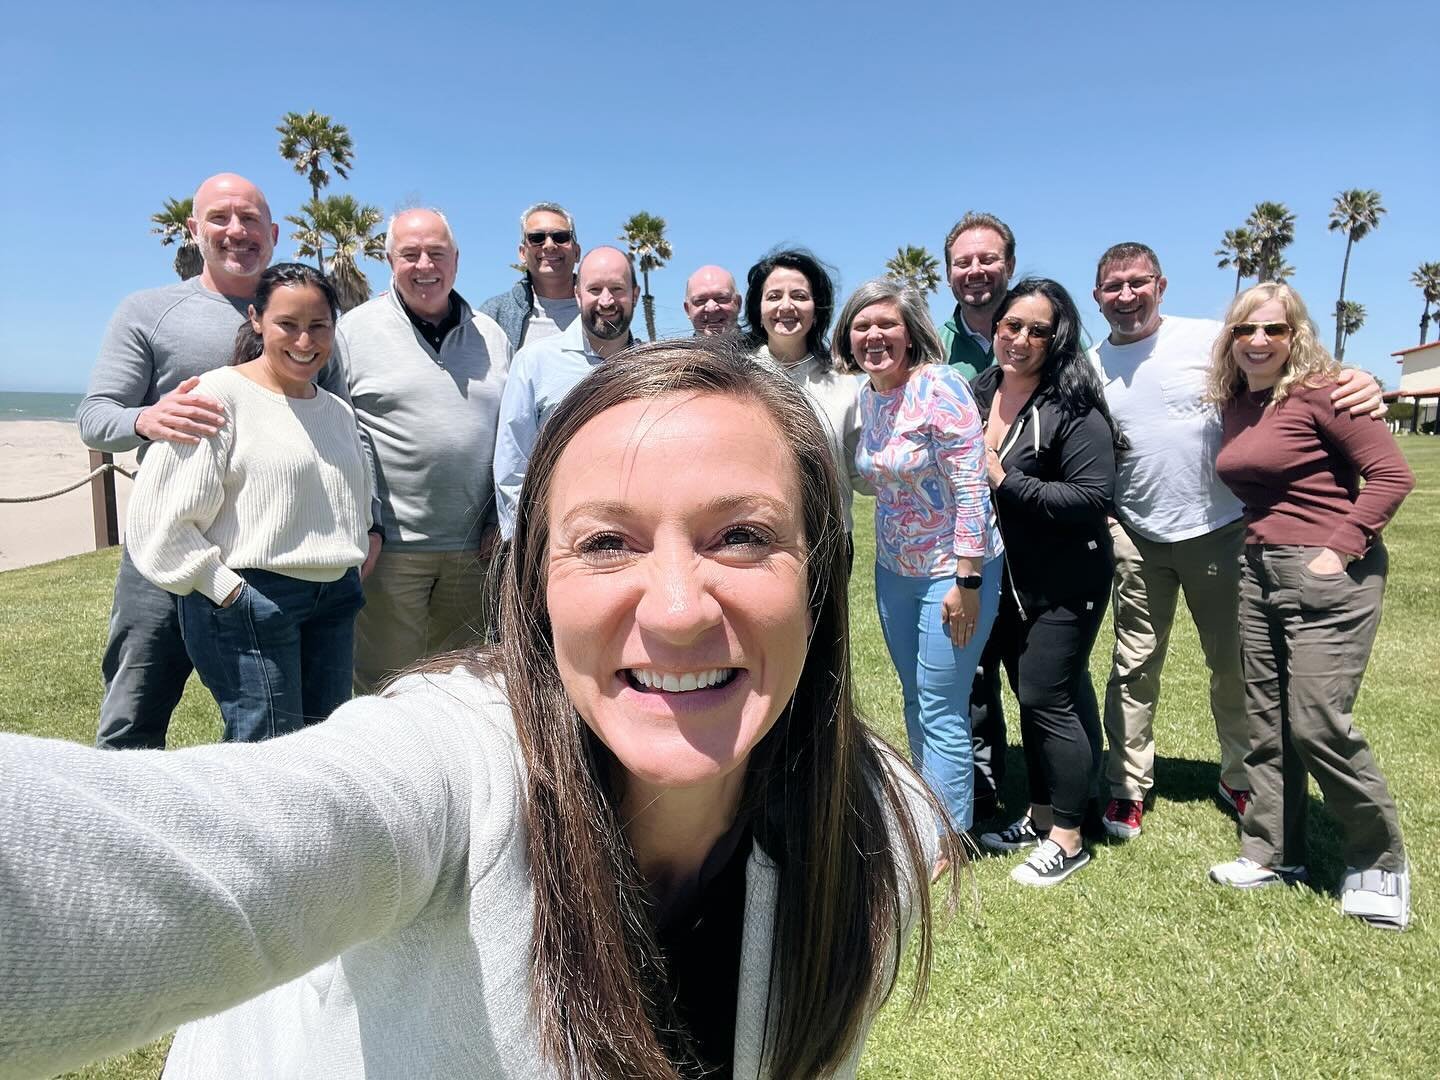 I had the best weekend in with this group of incredible leaders! 

Two years ago, they welcomed me to their Vistage group as a brand new speaker. 

So, it was quite an honor to be invited back for their (very first) RETREAT!!! 

Return visits are my 